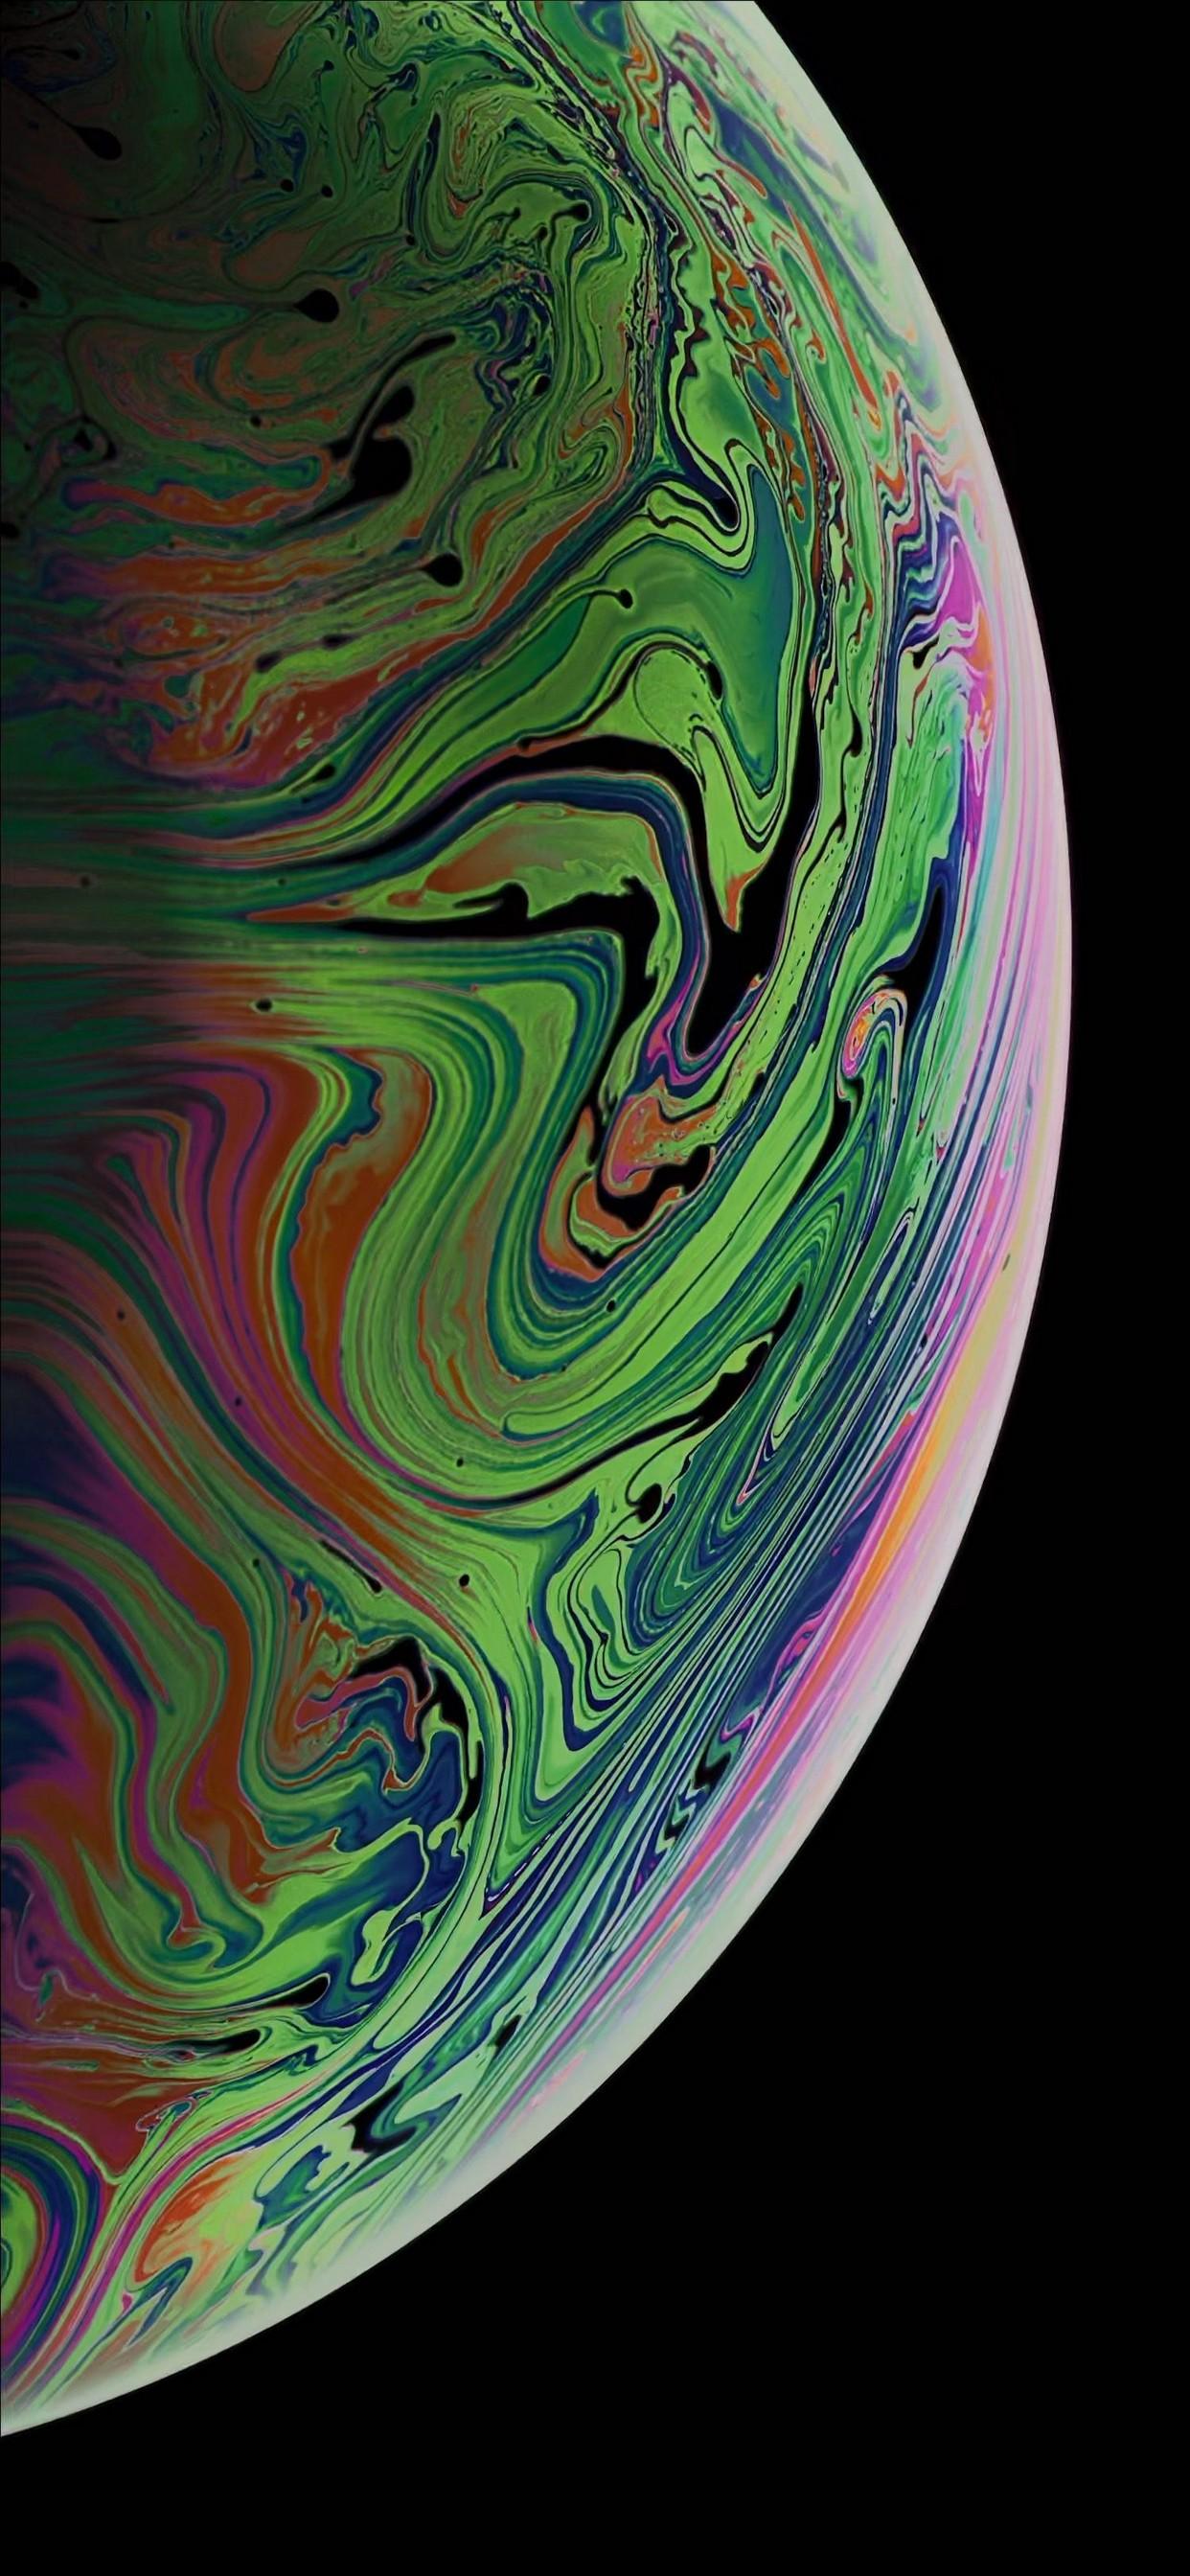 iphone x wallpapers wallpaper cave on iphone x earth wallpapers